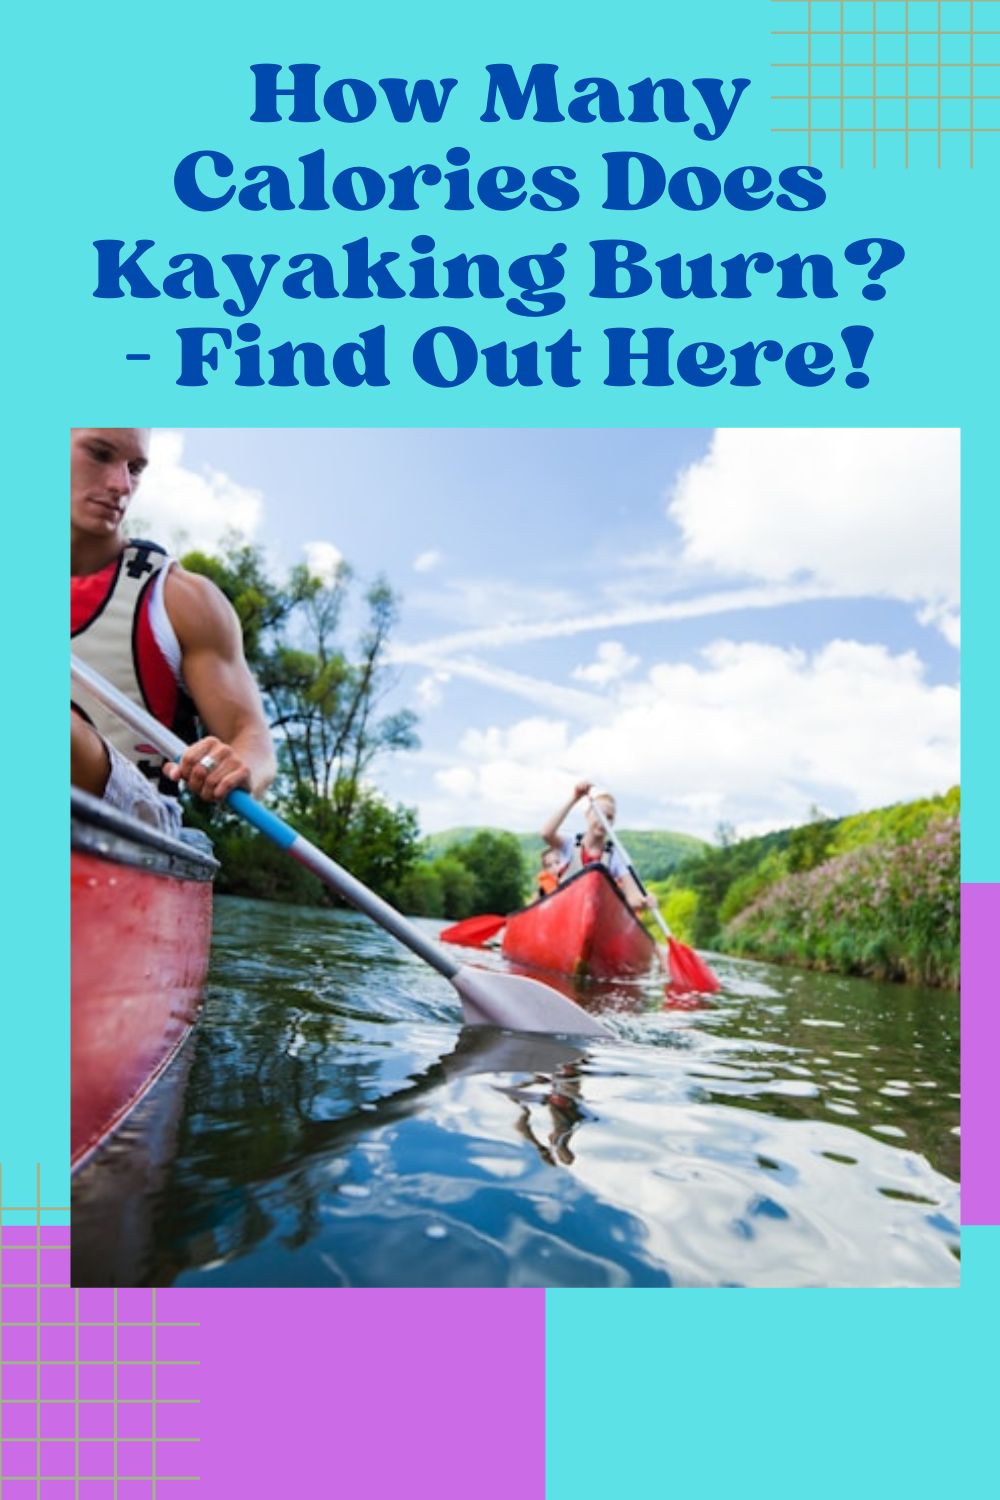 How Many Calories Does Kayaking Burn? - Find Out Here!